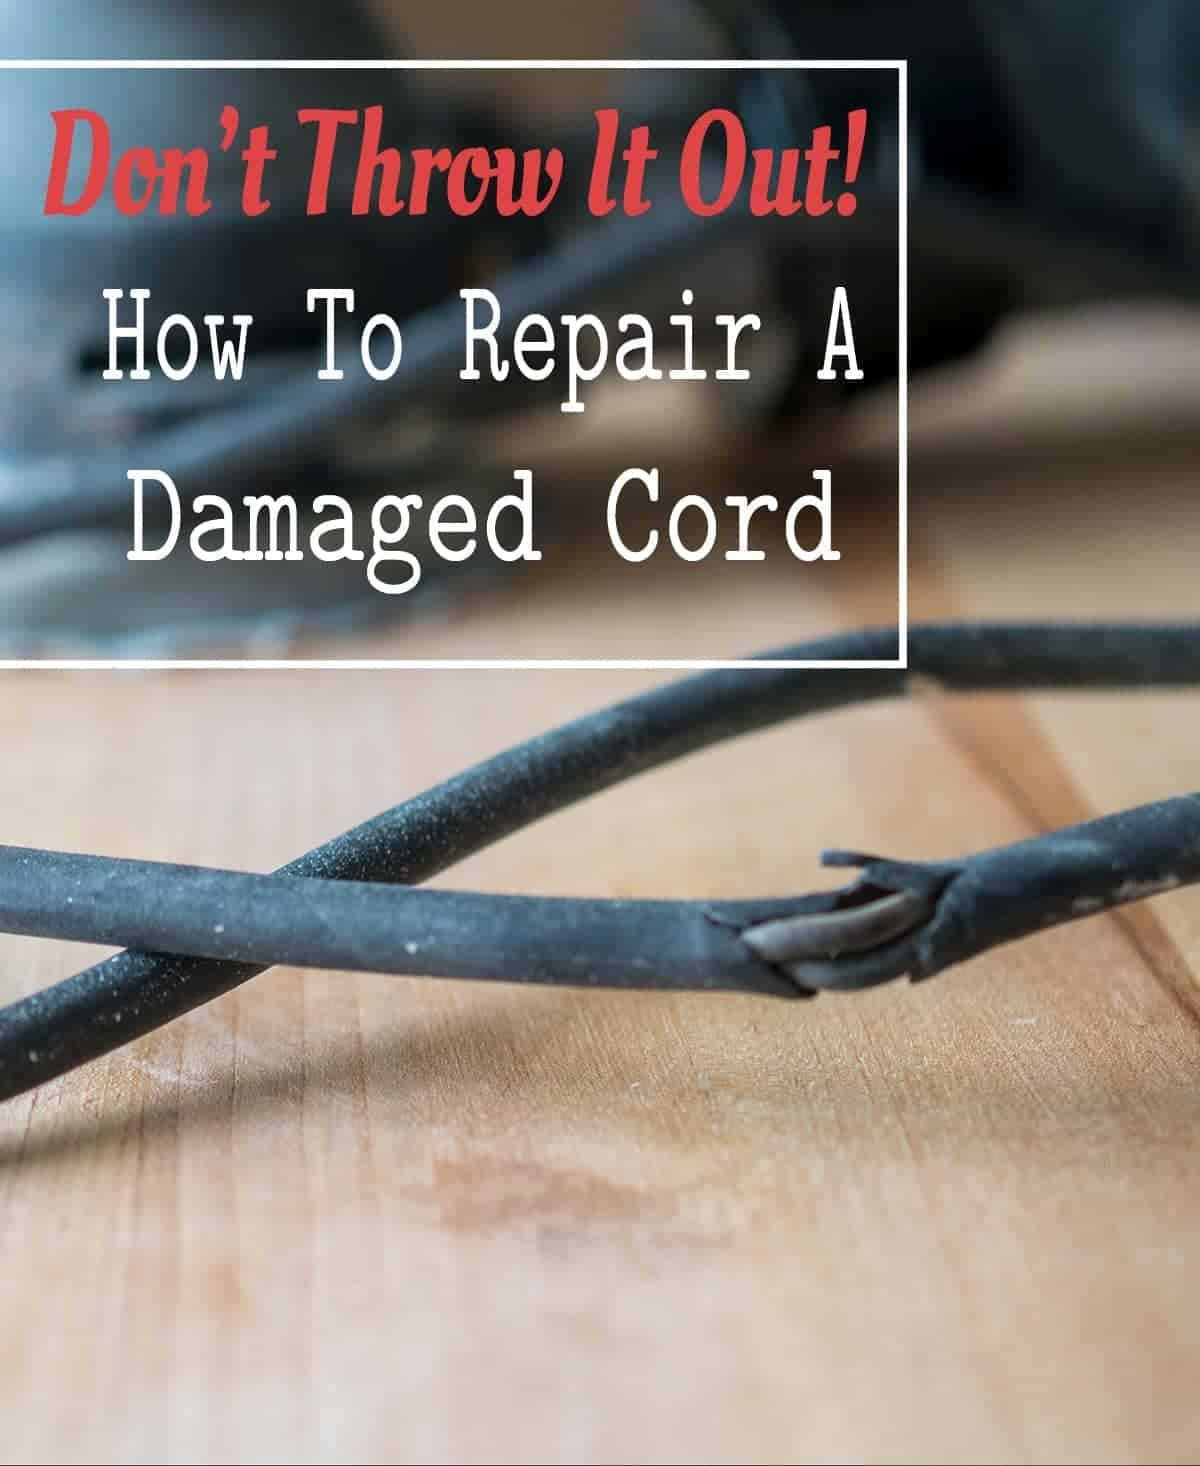 A broken extension cord that will be repaired with a title overlay.